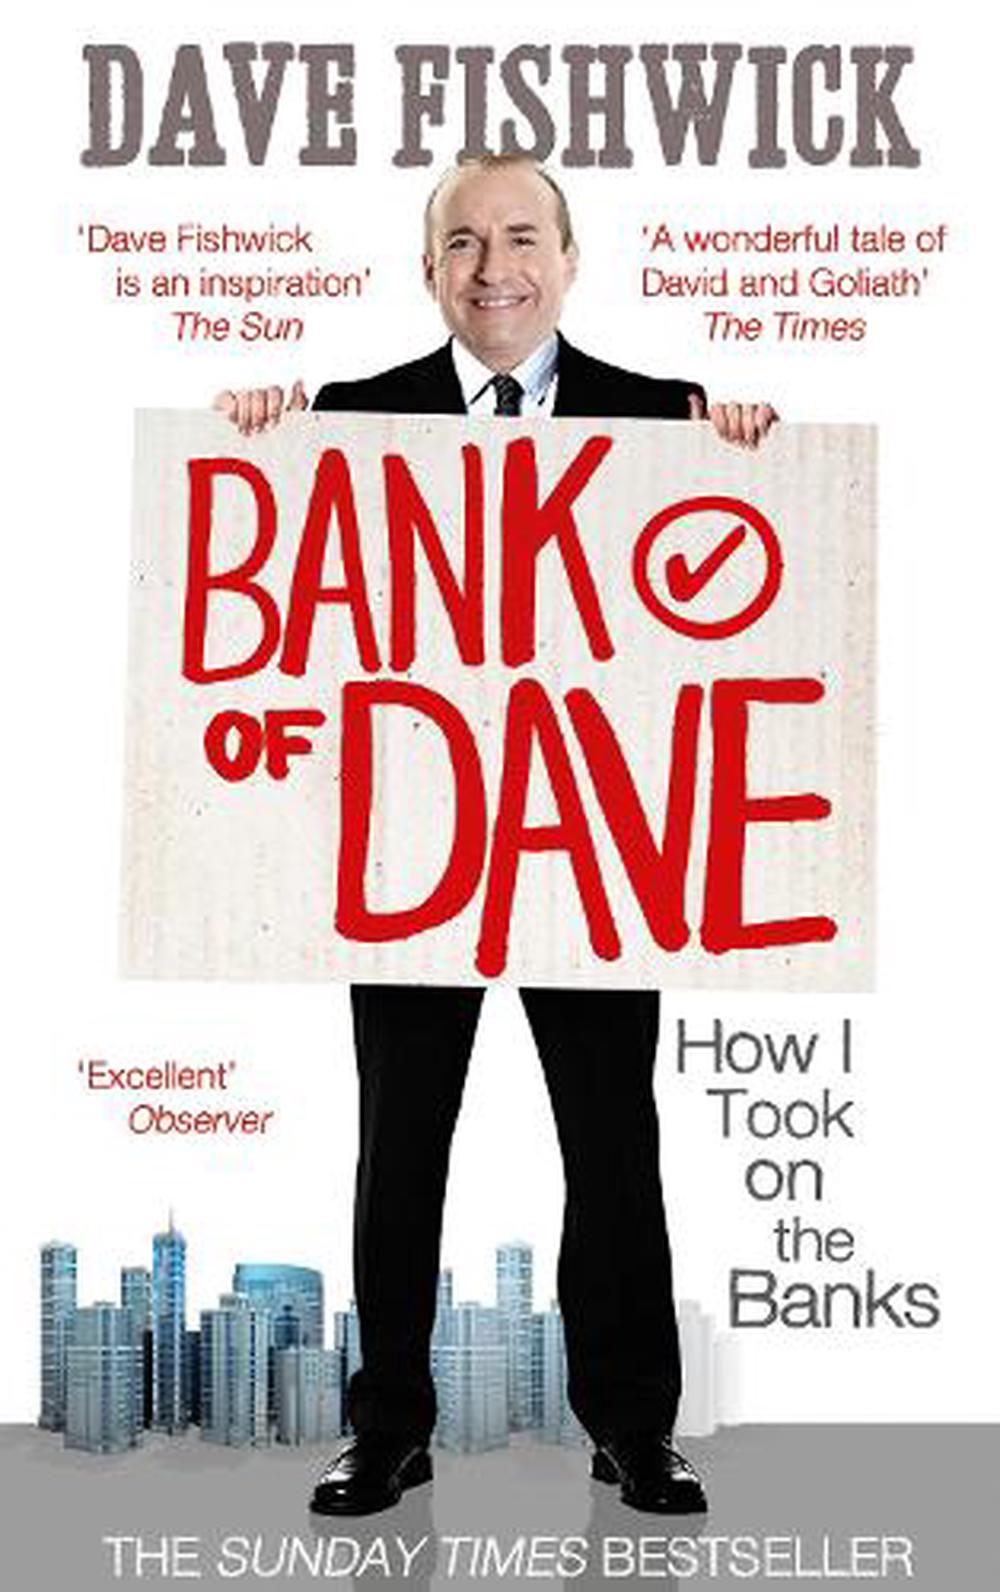 Bank of Dave by Dave Fishwick, Paperback, 9780753540787 Buy online at